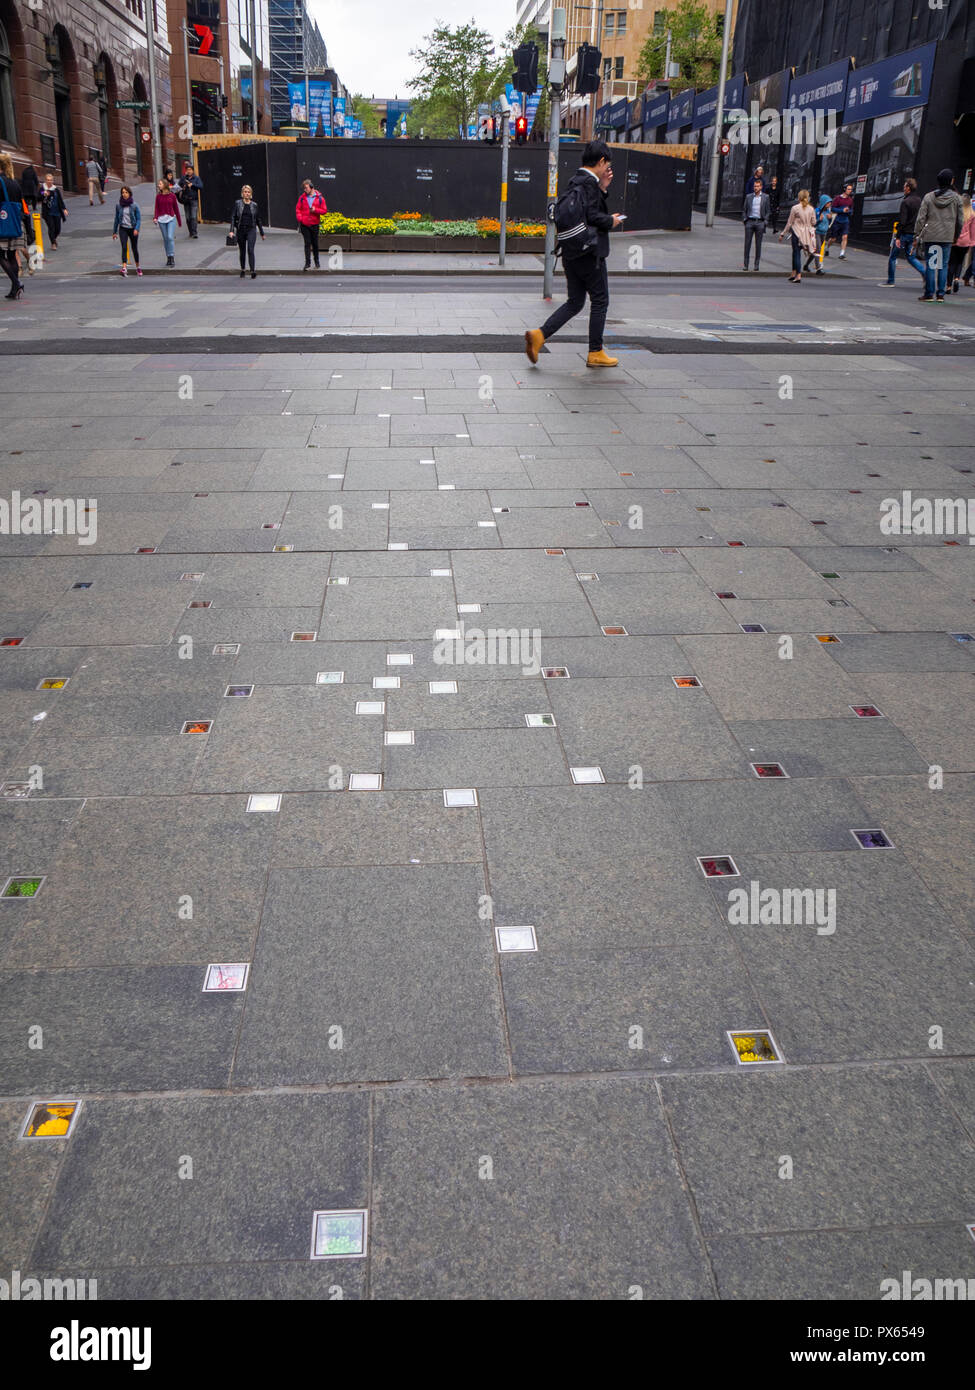 Lindt Cafe siege Memorial of inlaid flowers in the granite pavement of Martin Place Mall Sydney NSW Australia. Stock Photo